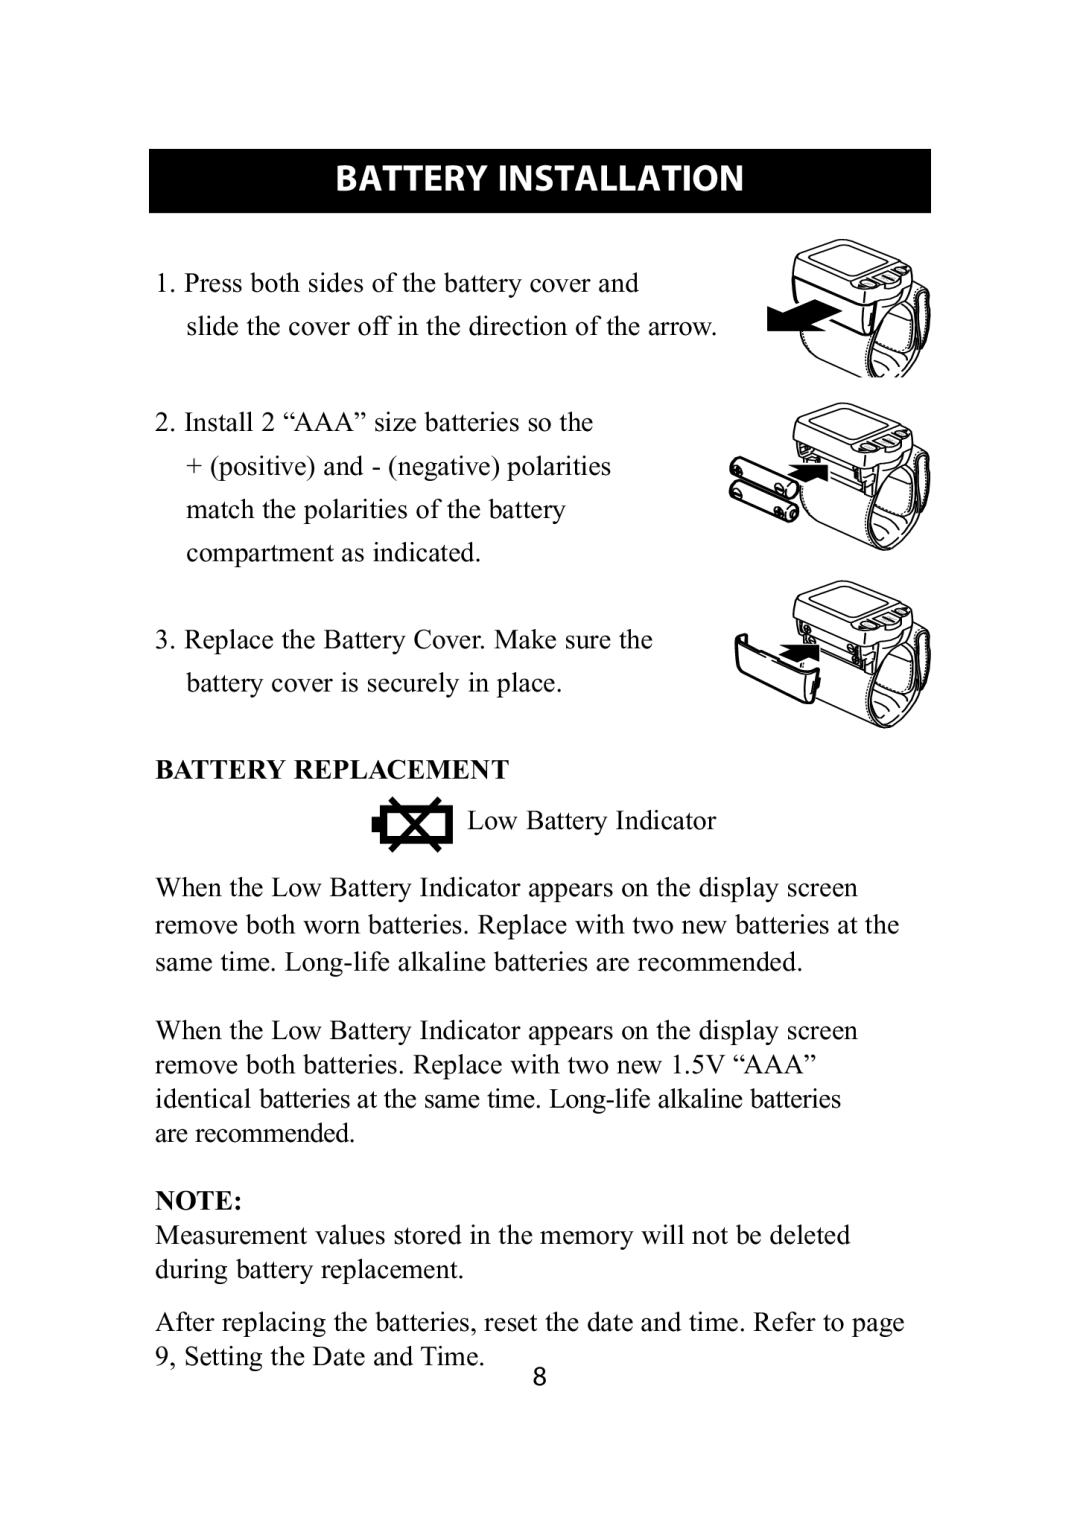 Omron Healthcare HEM-609 instruction manual Battery Installation, Battery Replacement 